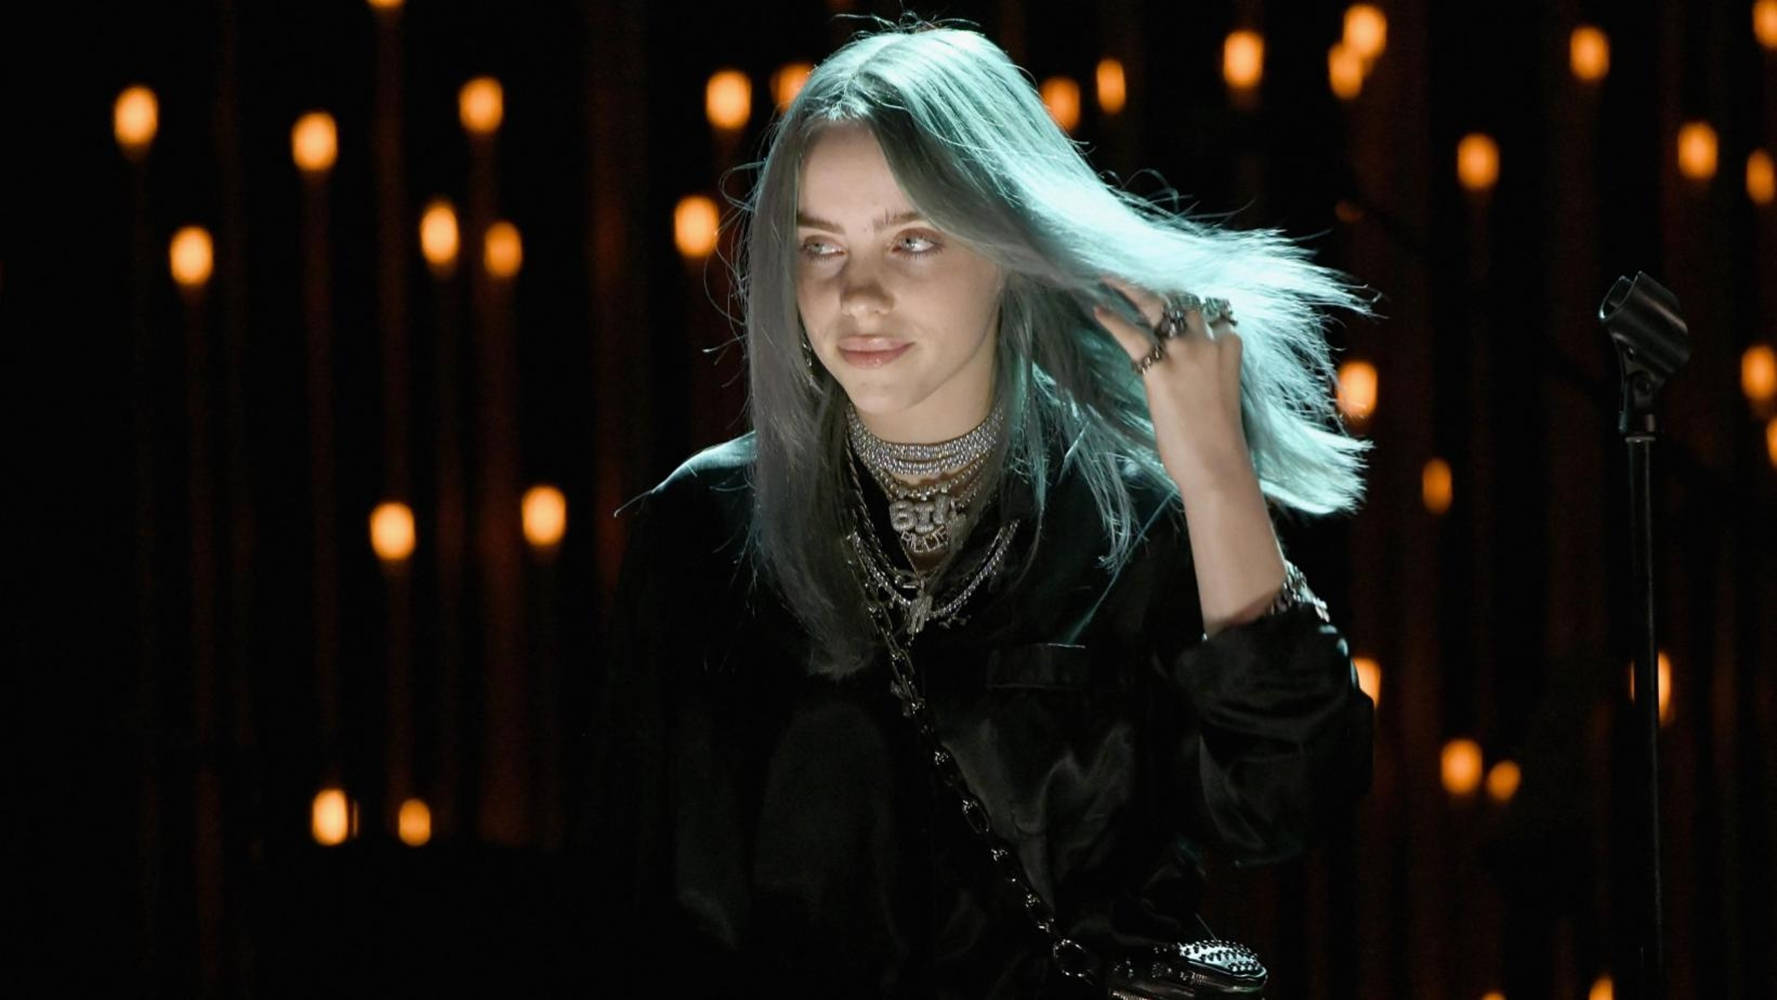 Aesthetic Billie Eilish With Lights Effect Wallpaper